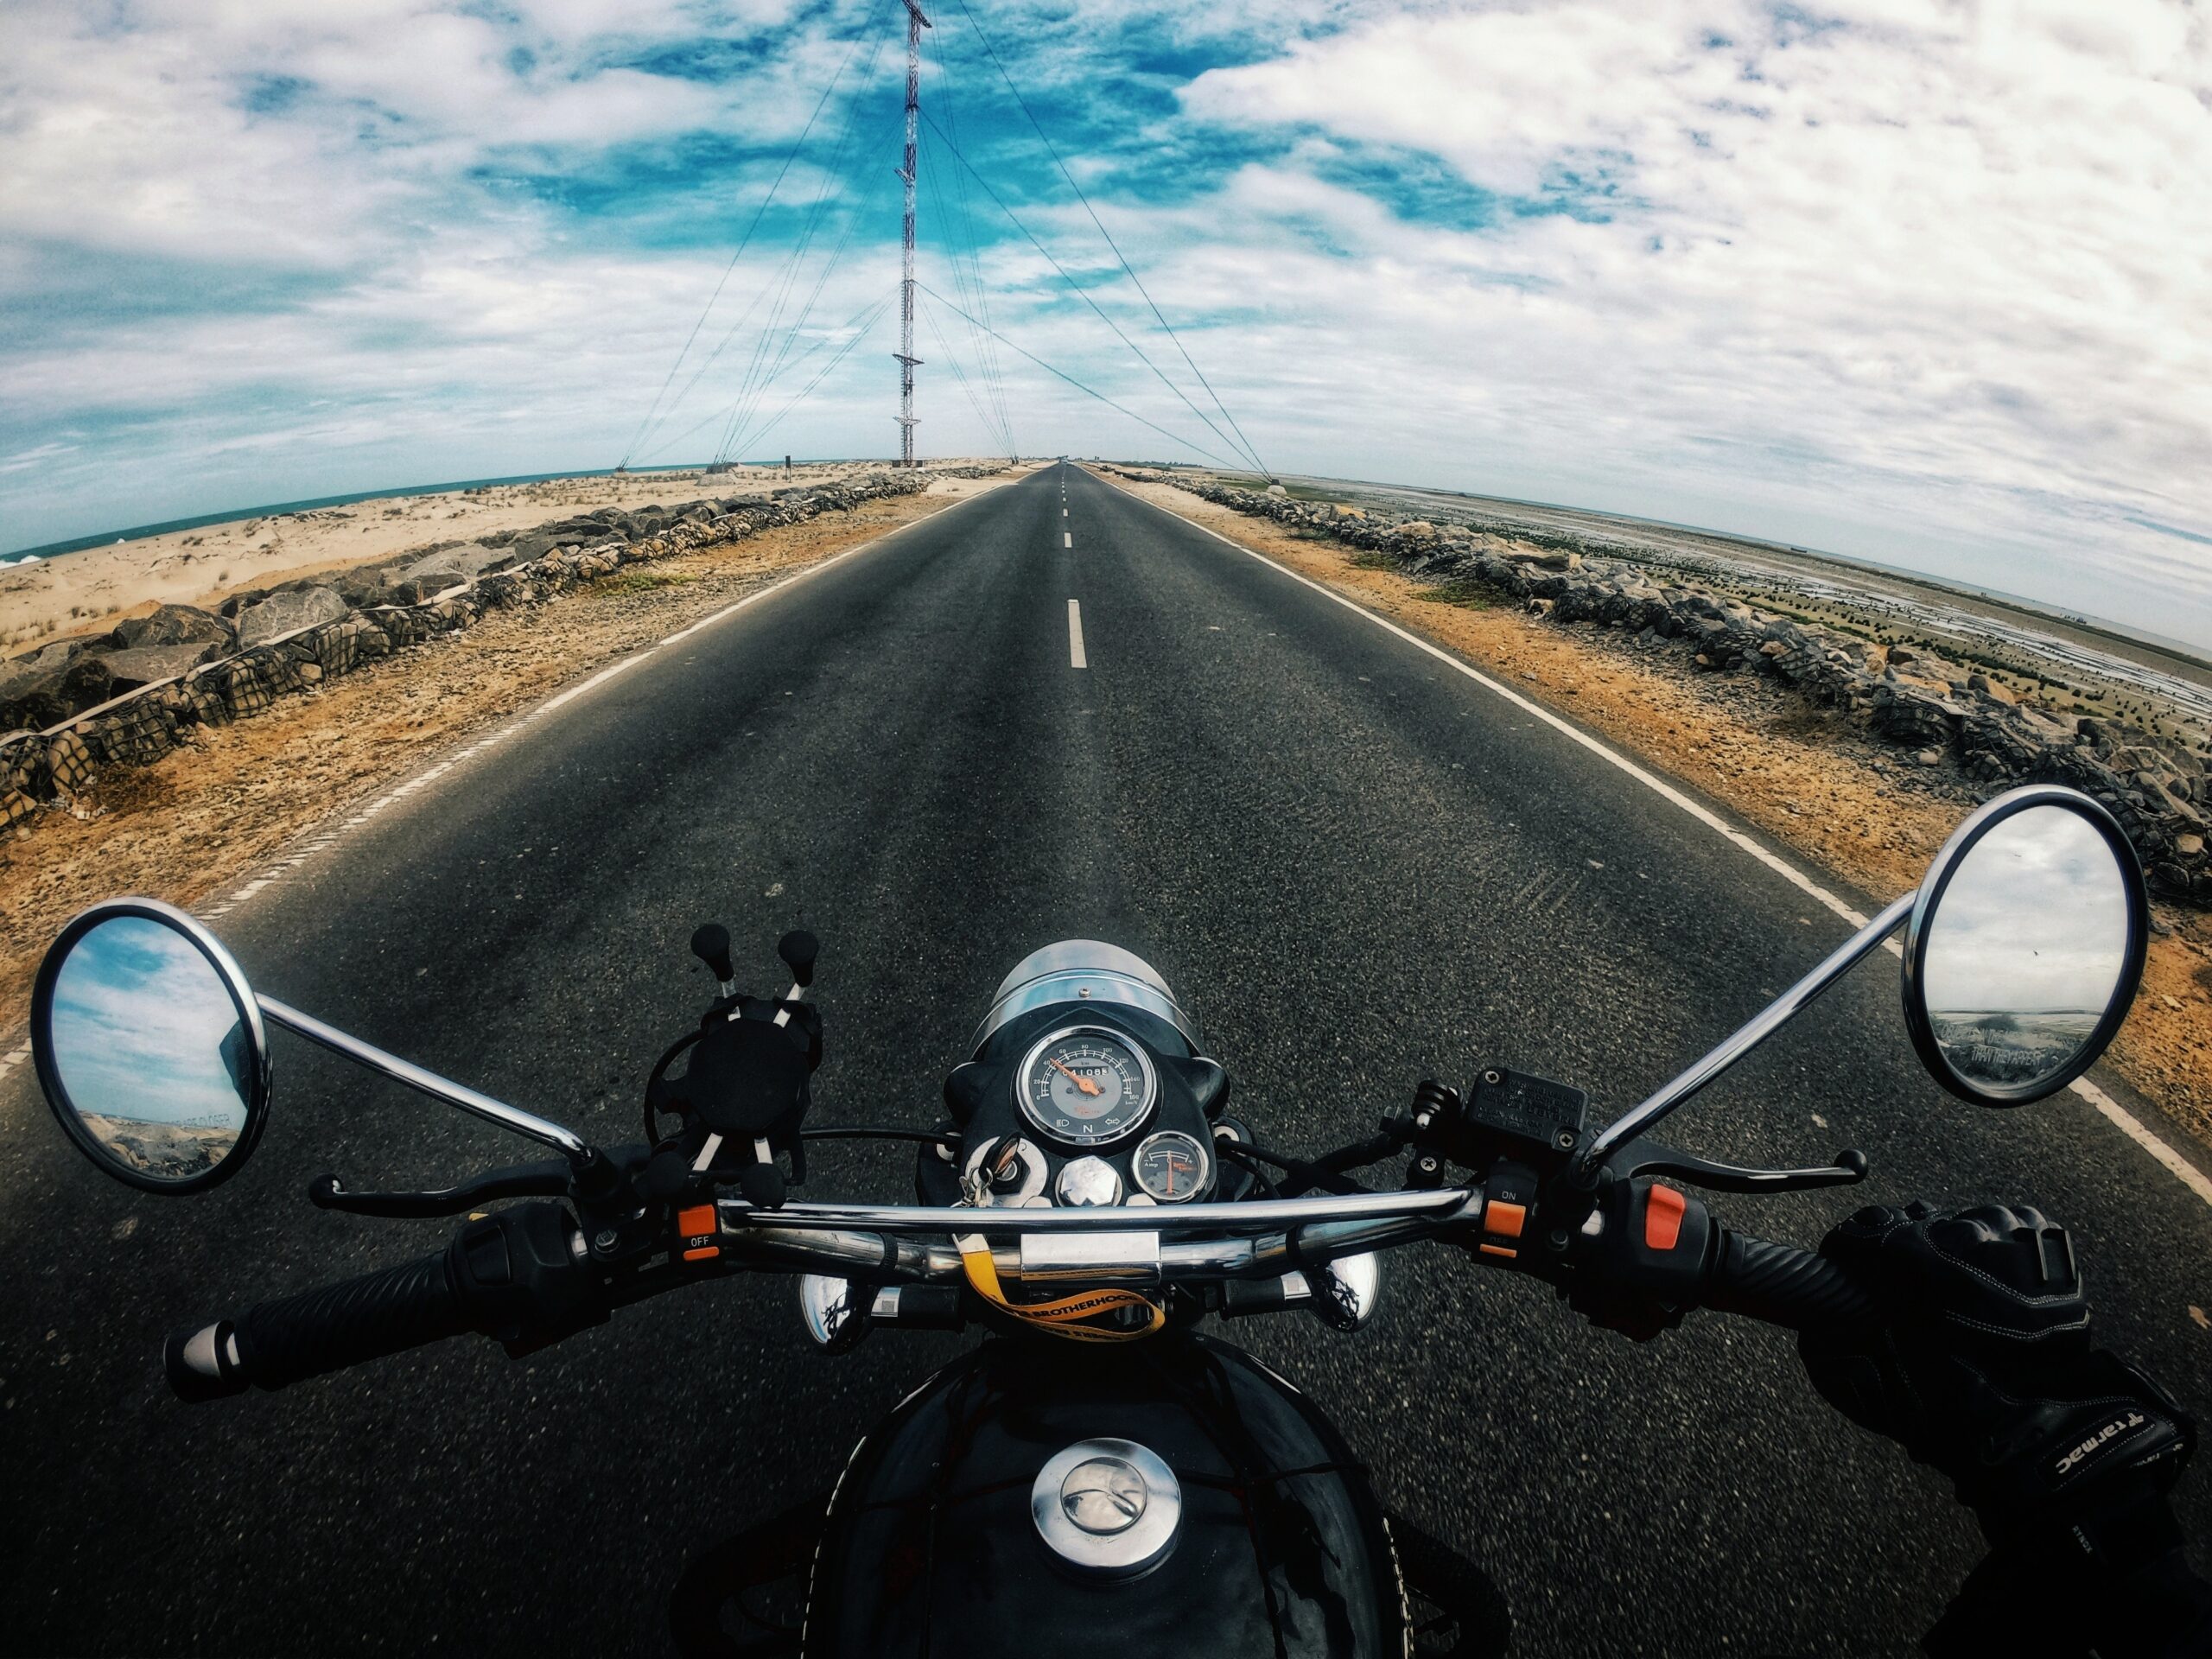 Riding a motorcycle on a highway image